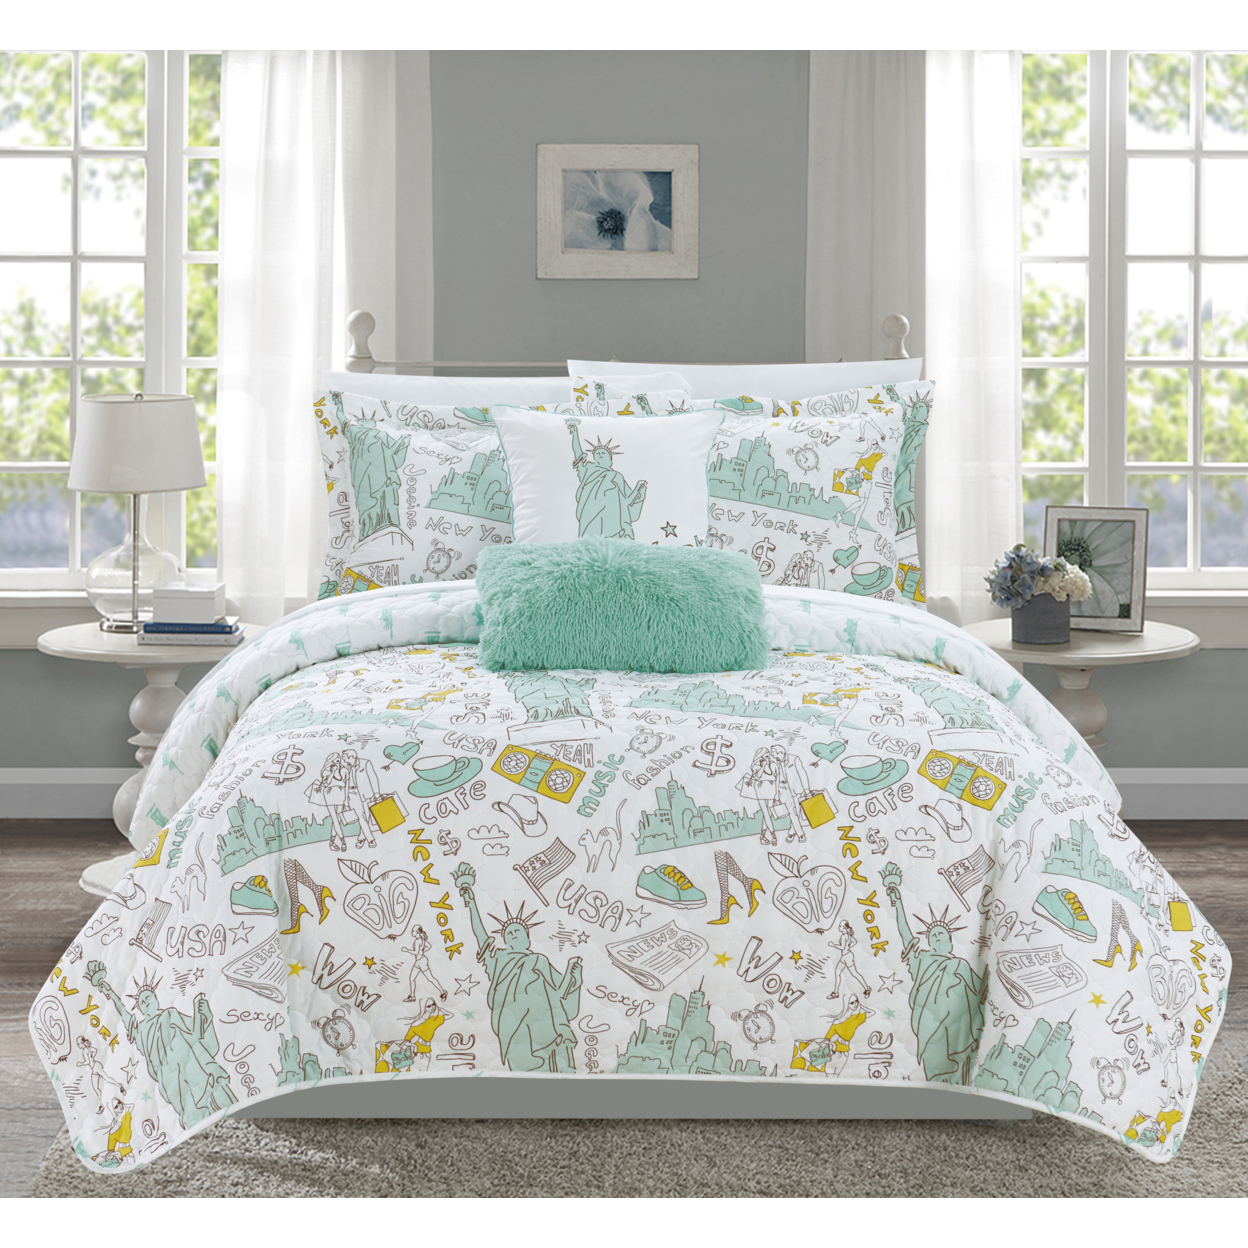 Bay Park 5 Or 4 Piece Reversible Quilt Set Bay Park City Inspired Printed Design Coverlet Bedding - Green, Twin